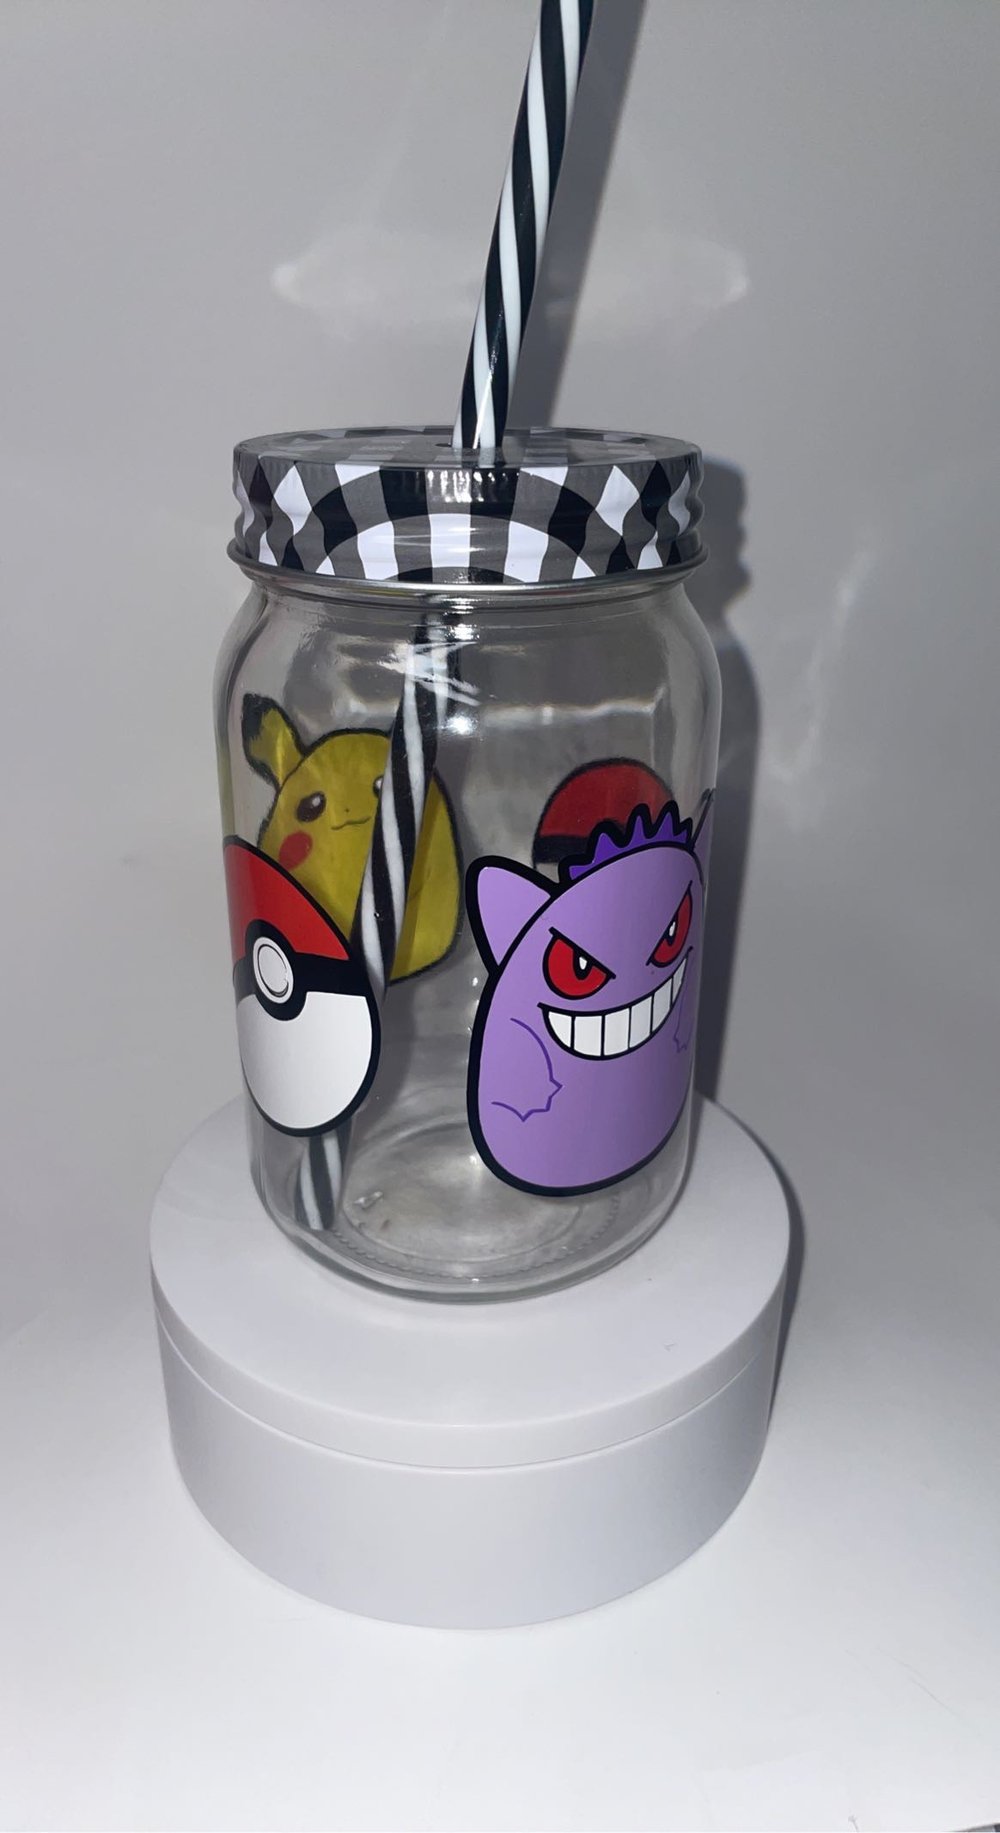 Pokemon Squishmallow Glass Cup + Lid + Straw